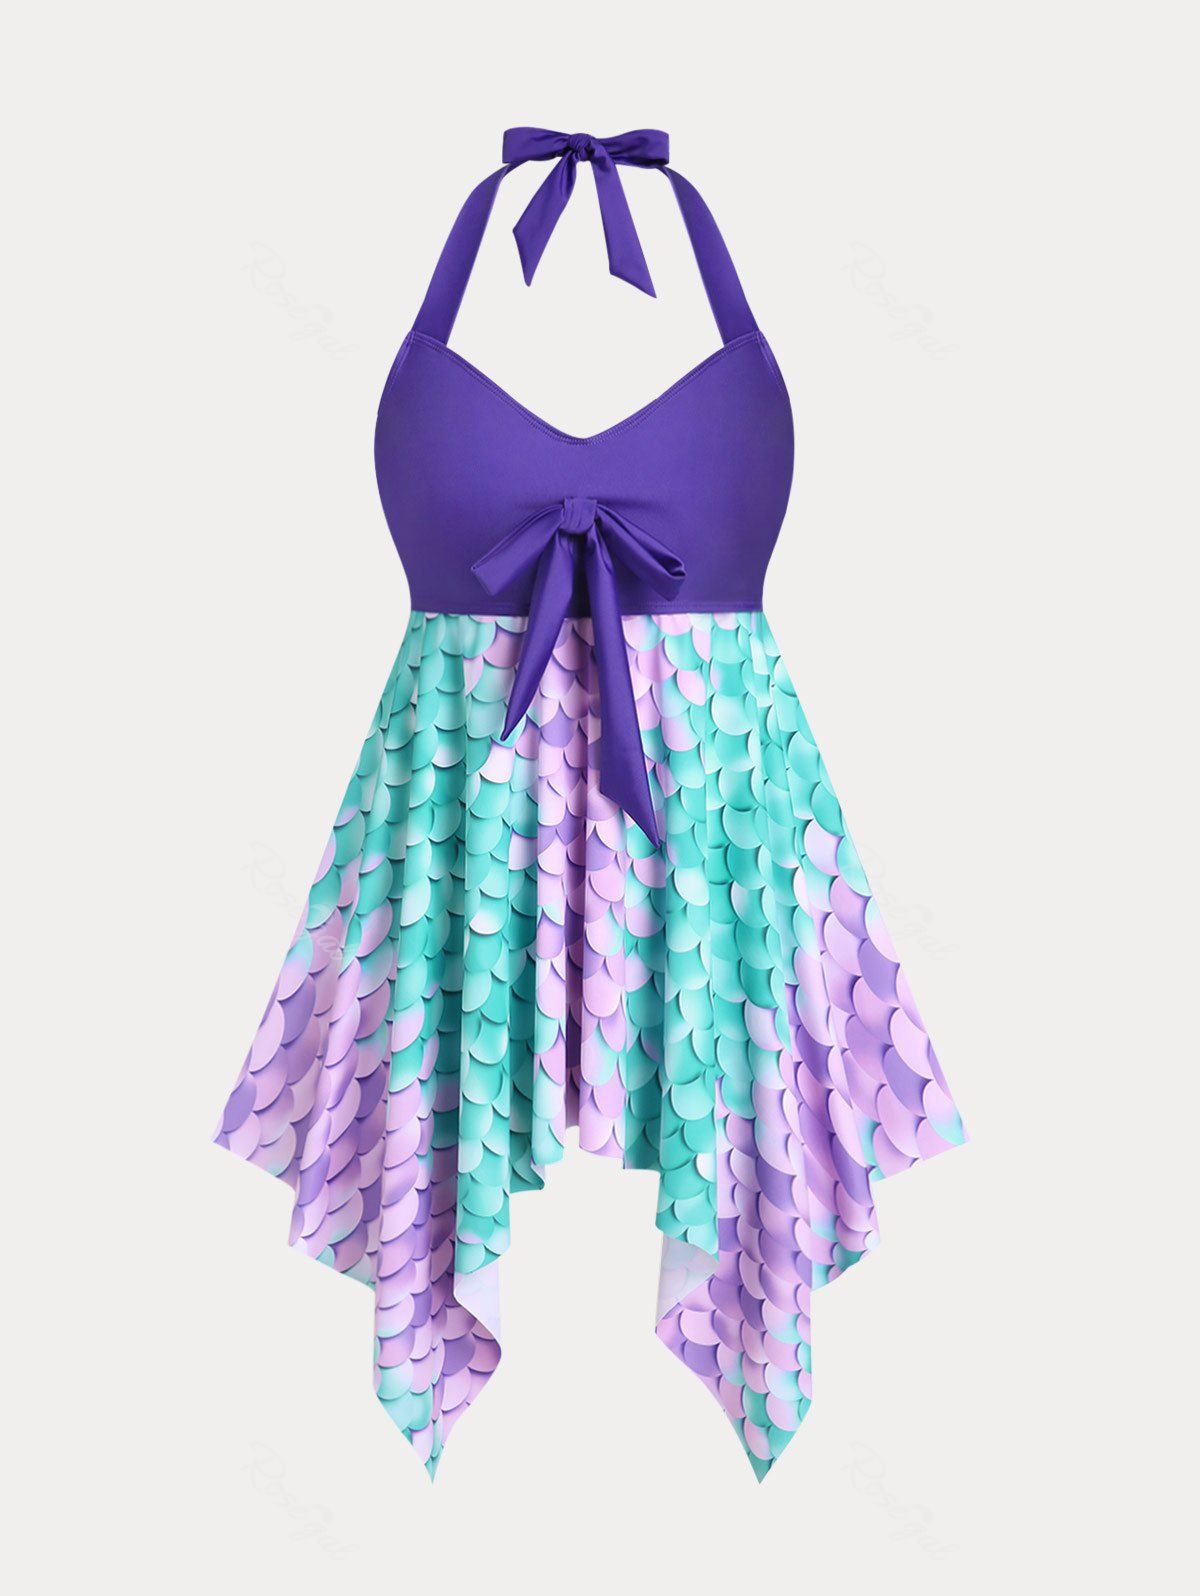 Outfit Plus Size & Curve Halter Mermaid Print Backless Handkerchief Tankini Swimsuit  